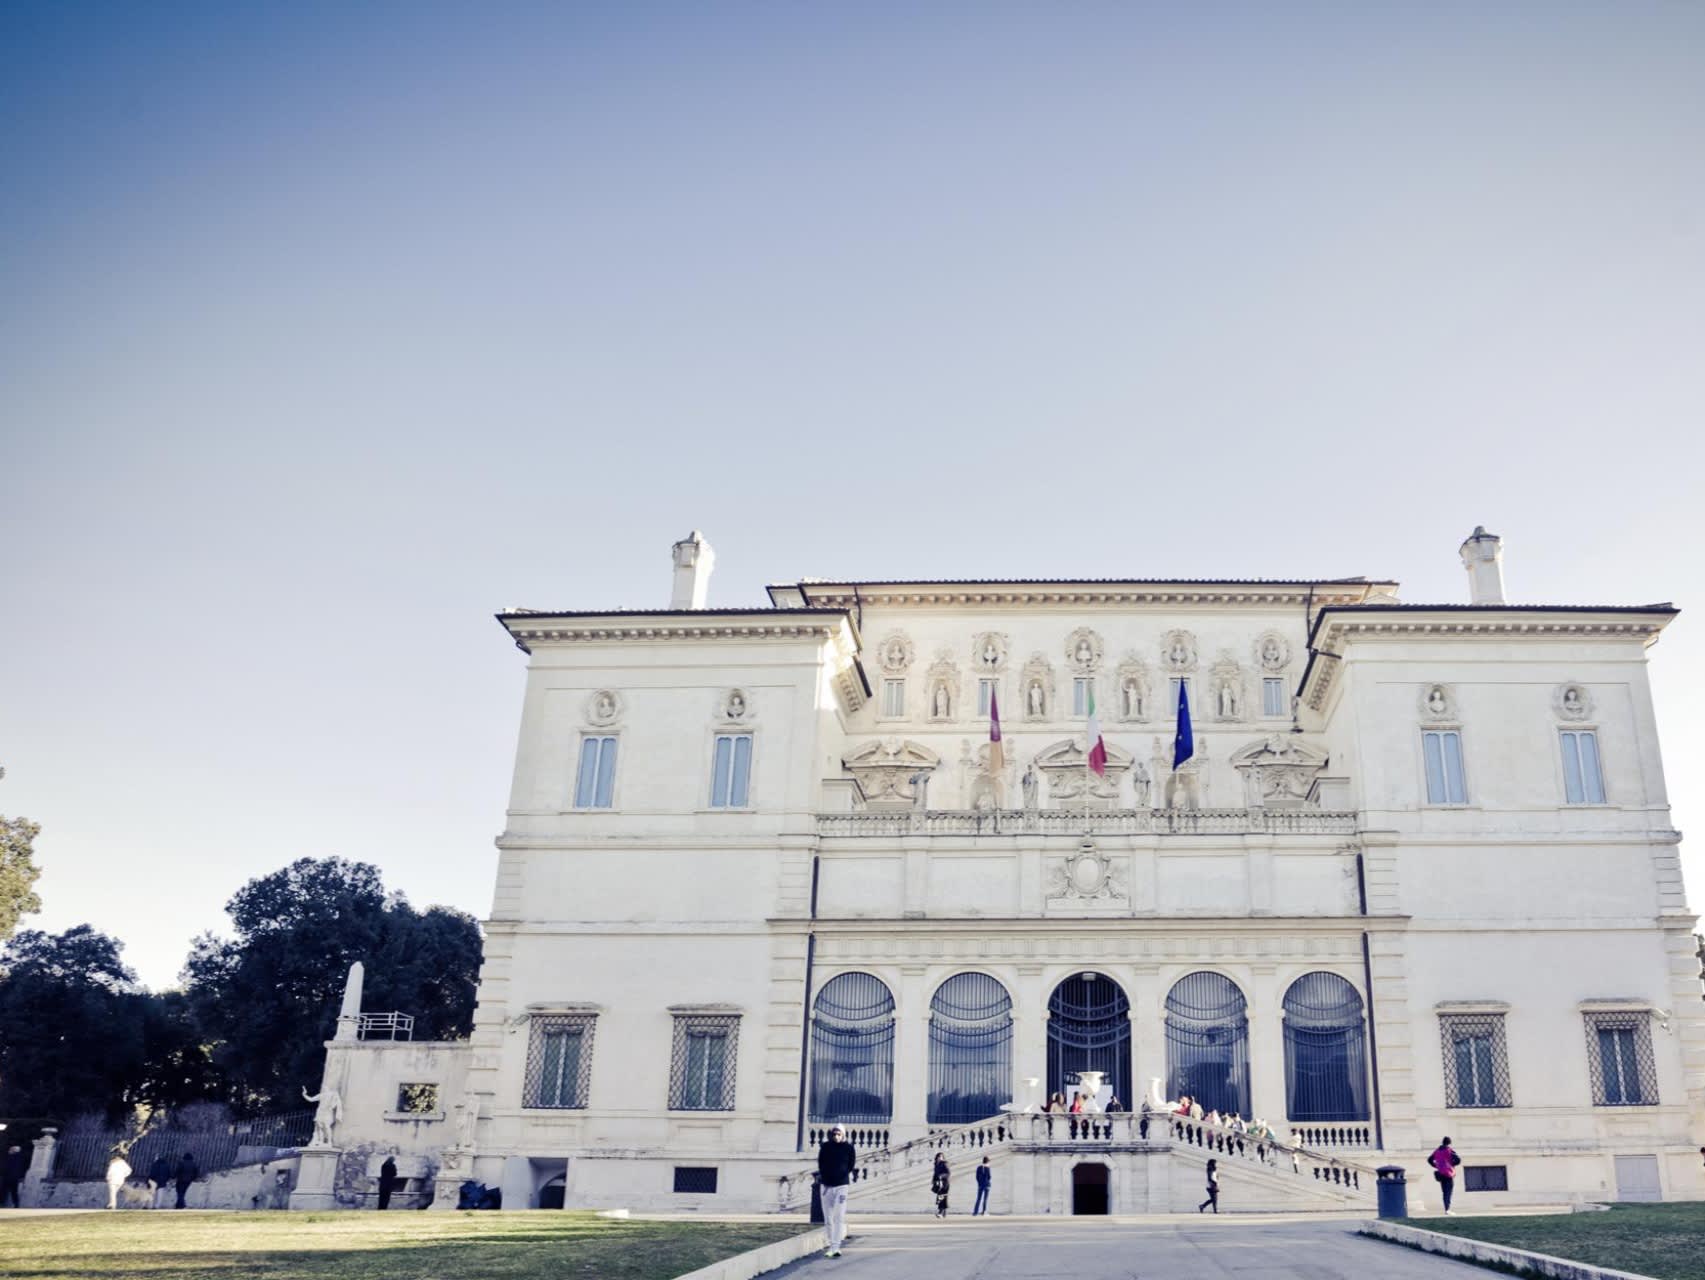 Guided Tour of Galleria Borghese with Meeting Point